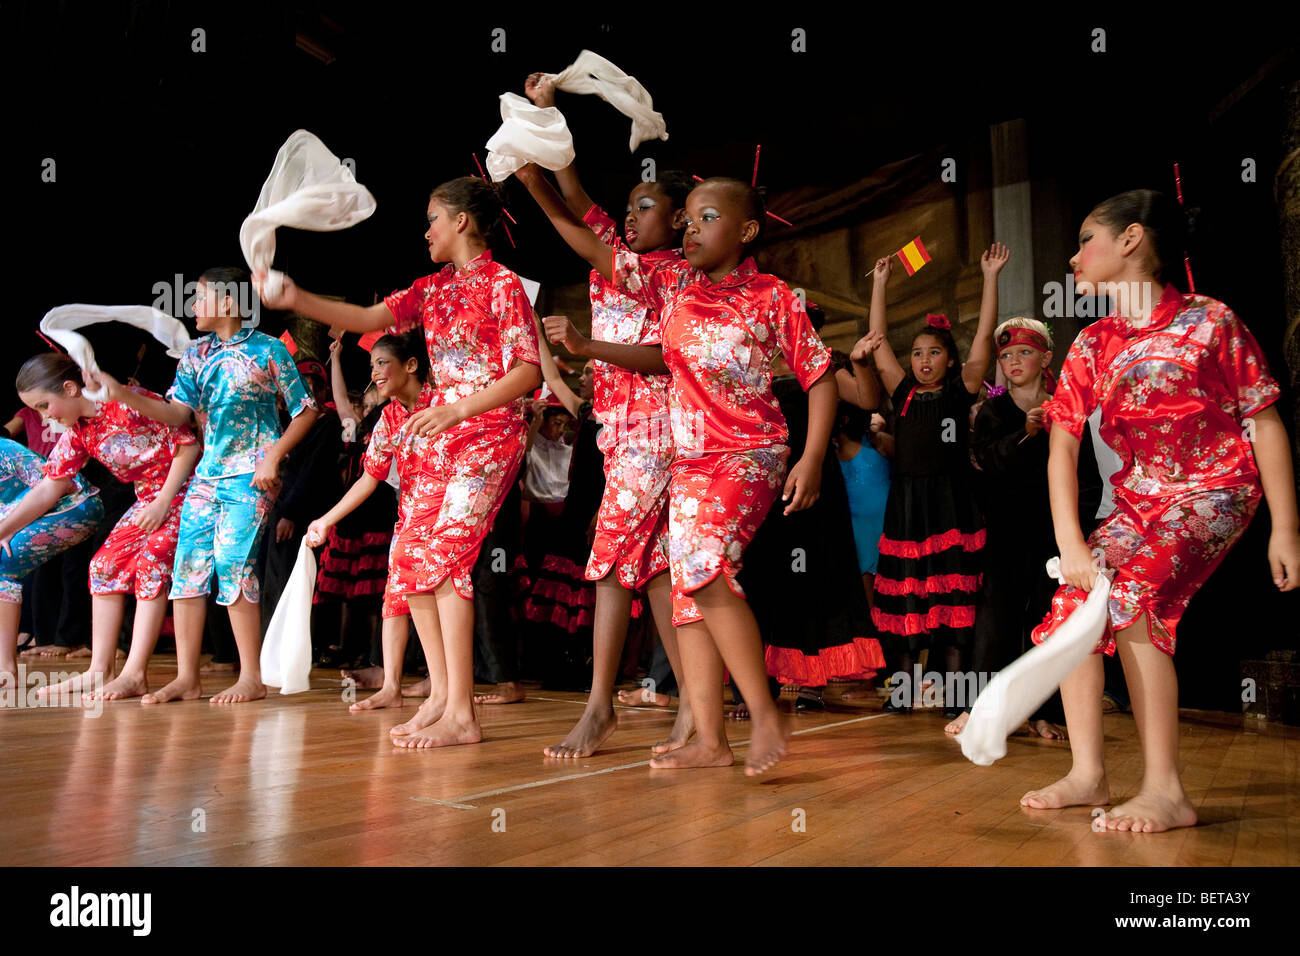 Students of the Junior school performing 'The Royal Dance' at St George's School, Cape Town, South Africa Stock Photo